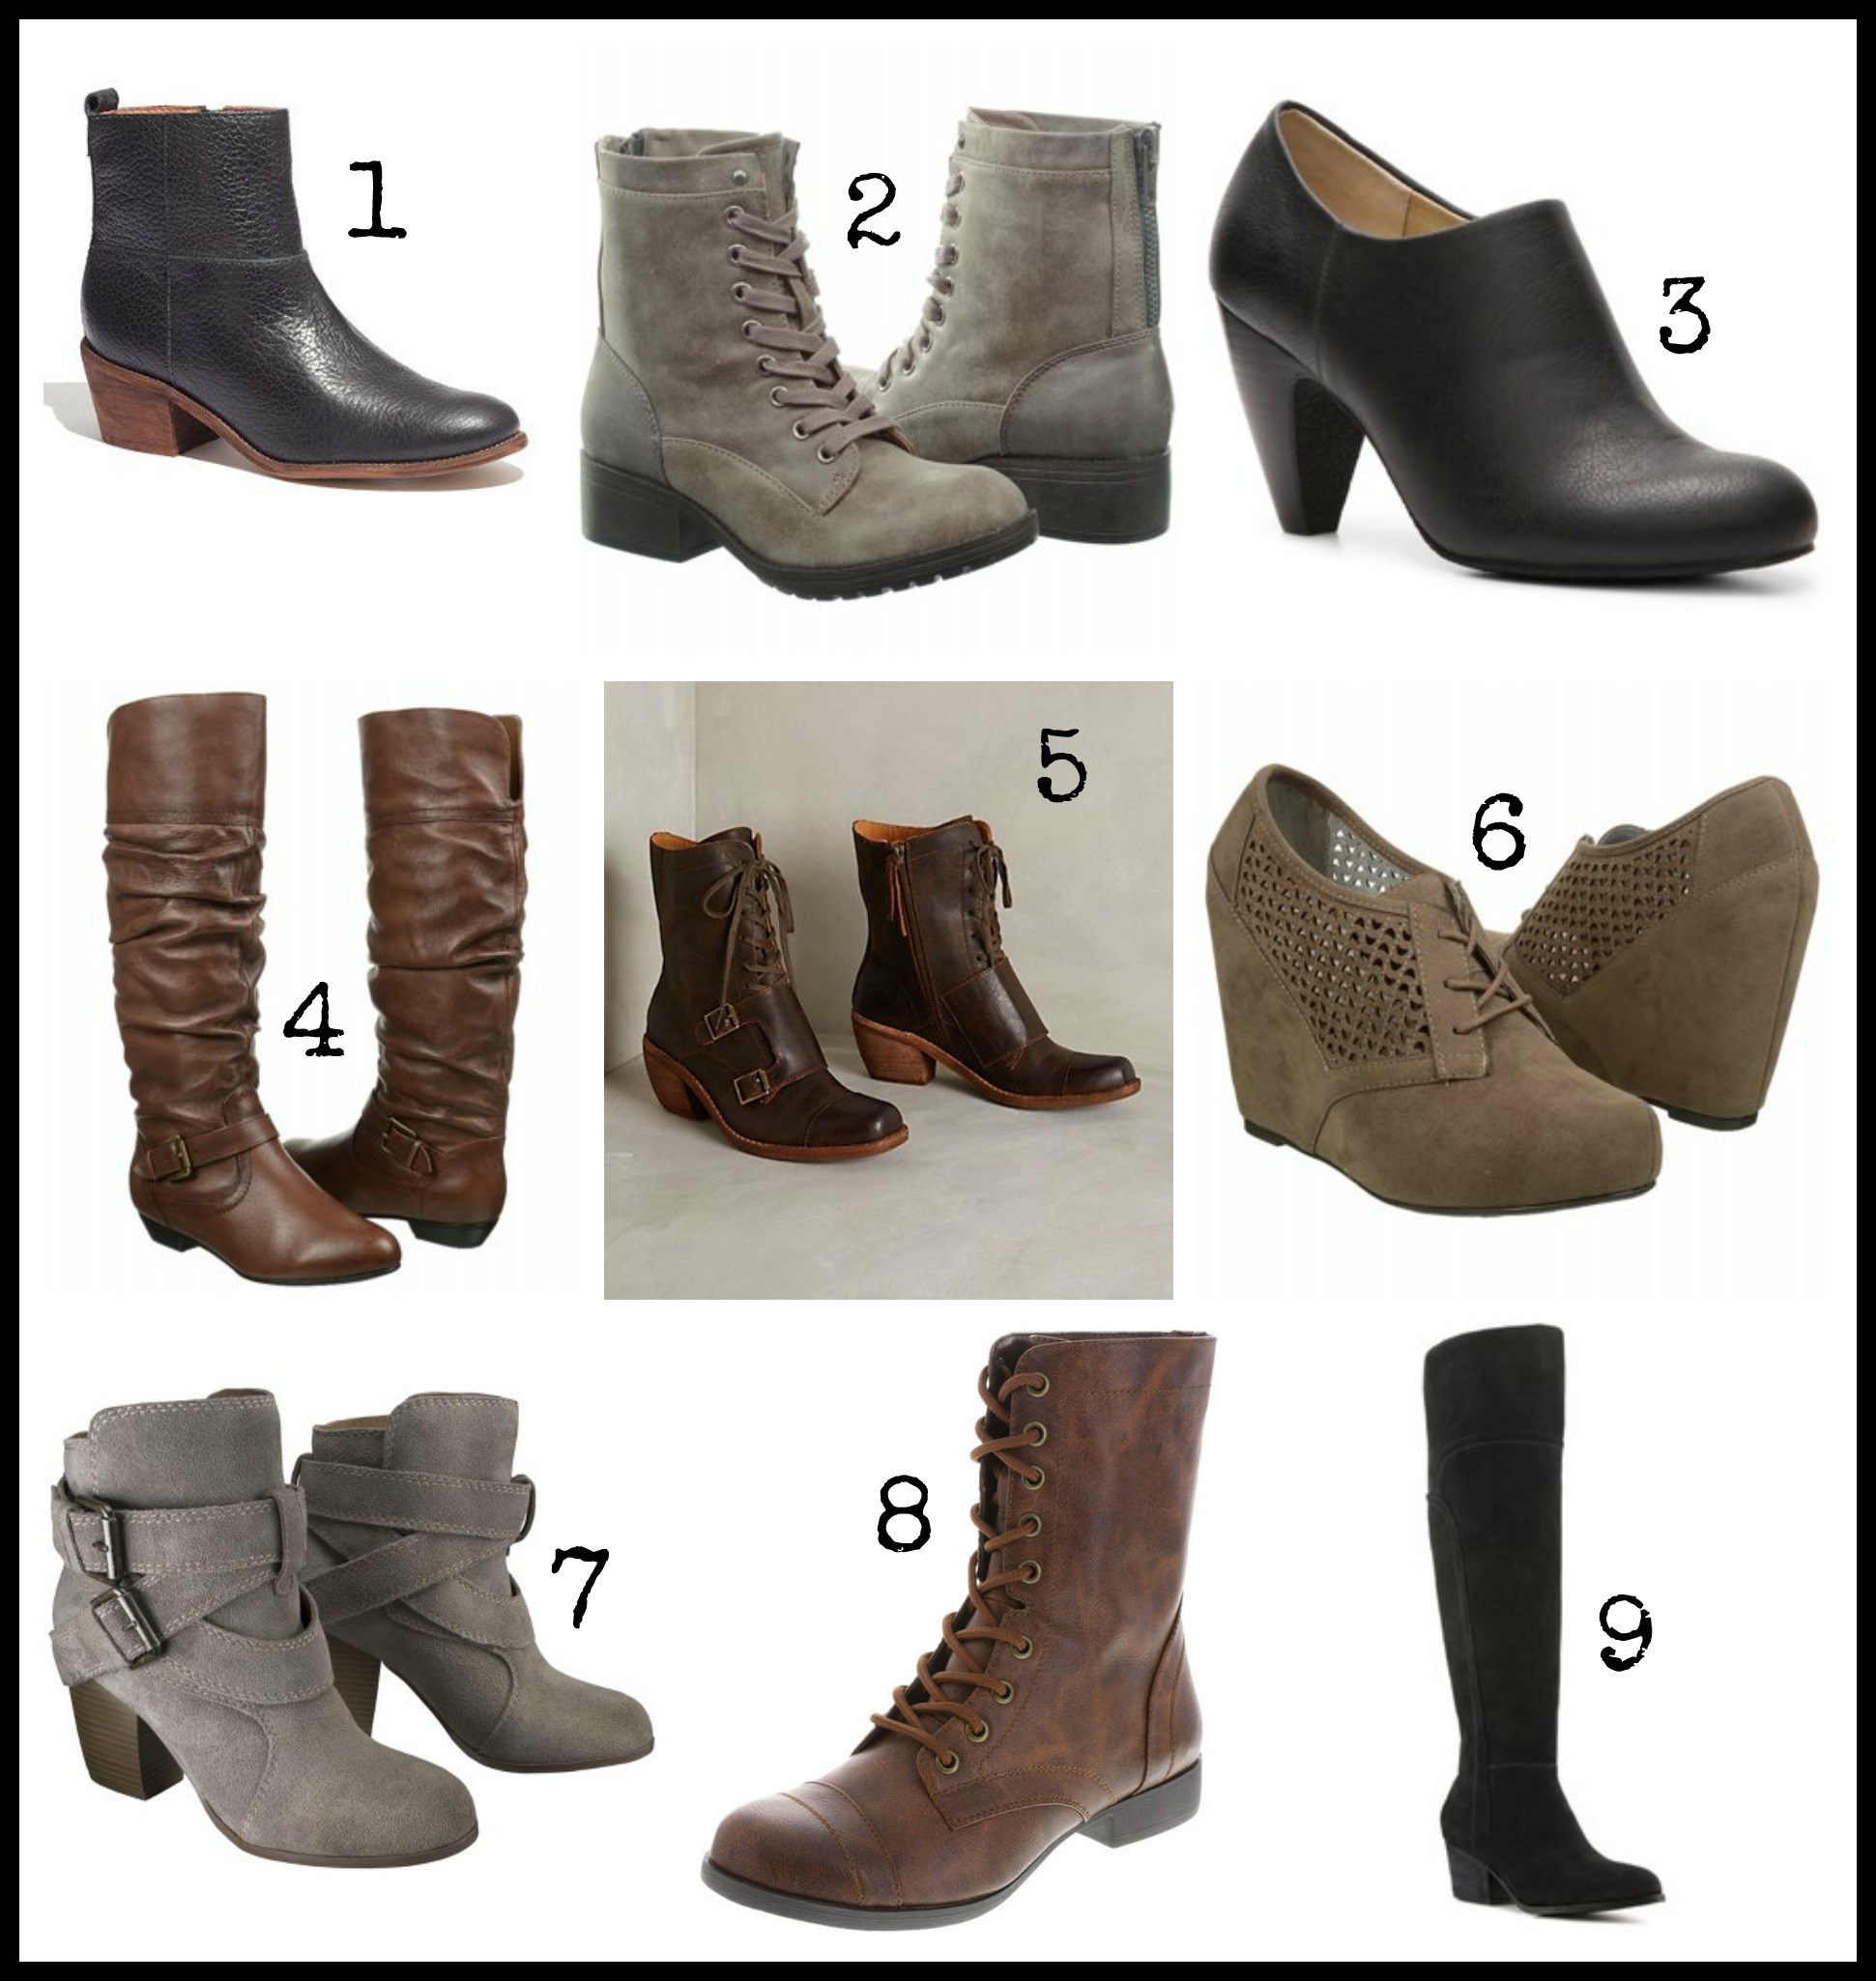 Timberland Boot Styles Cheap Prices, Save 59% | jlcatj.gob.mx